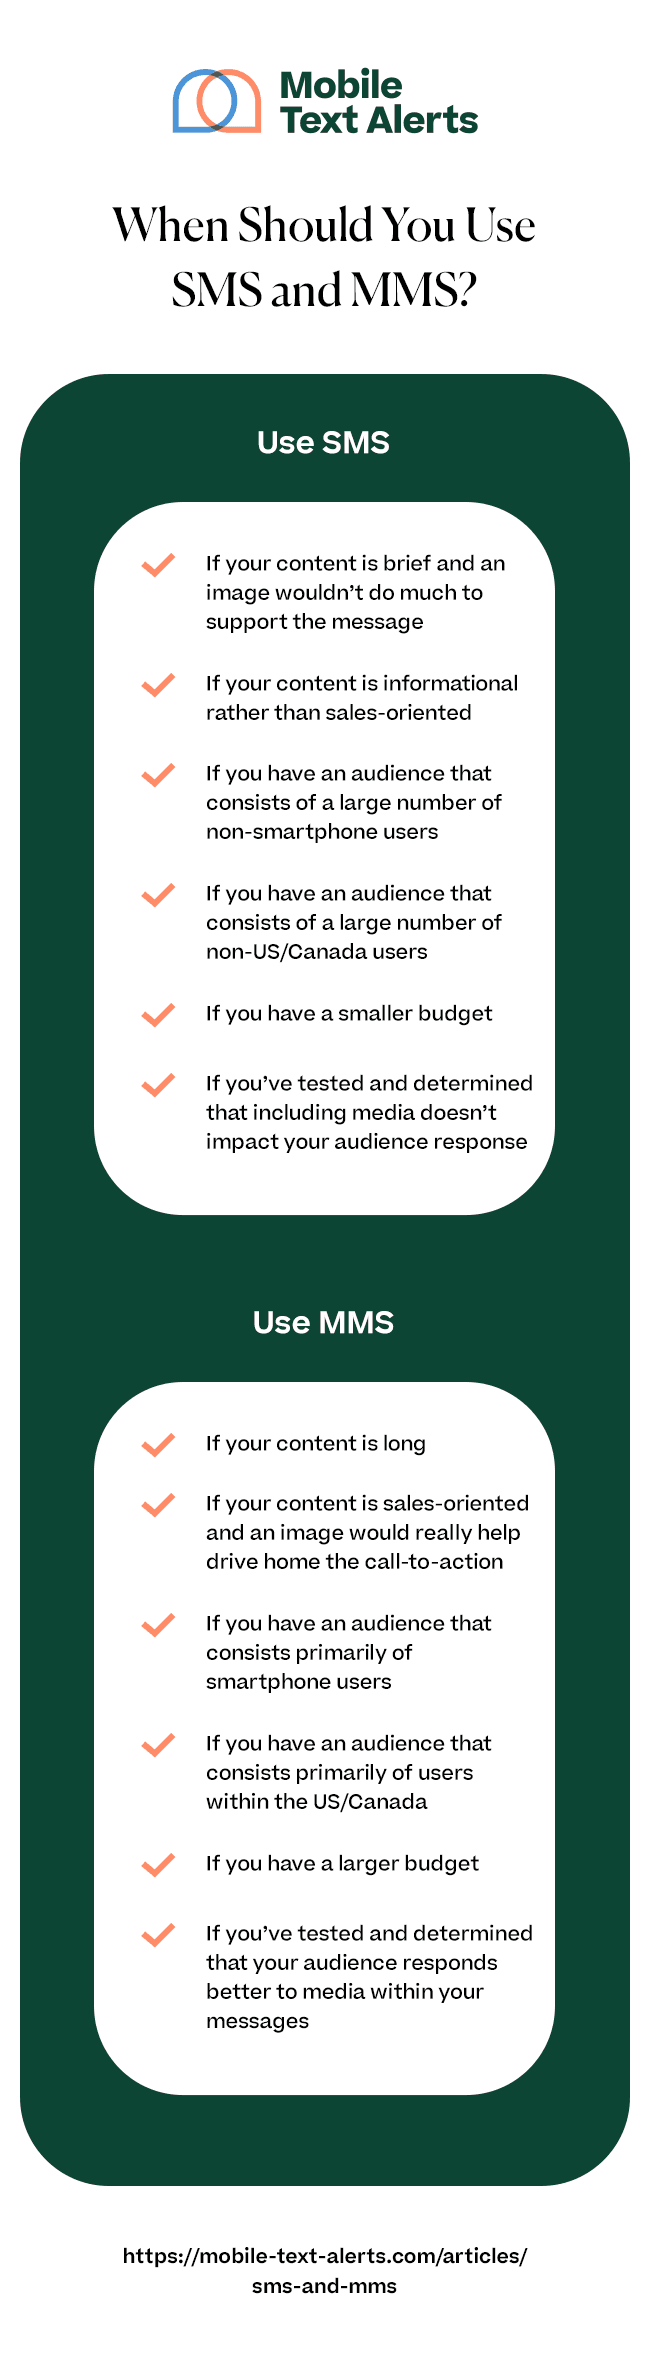 When should you use SMS and MMS